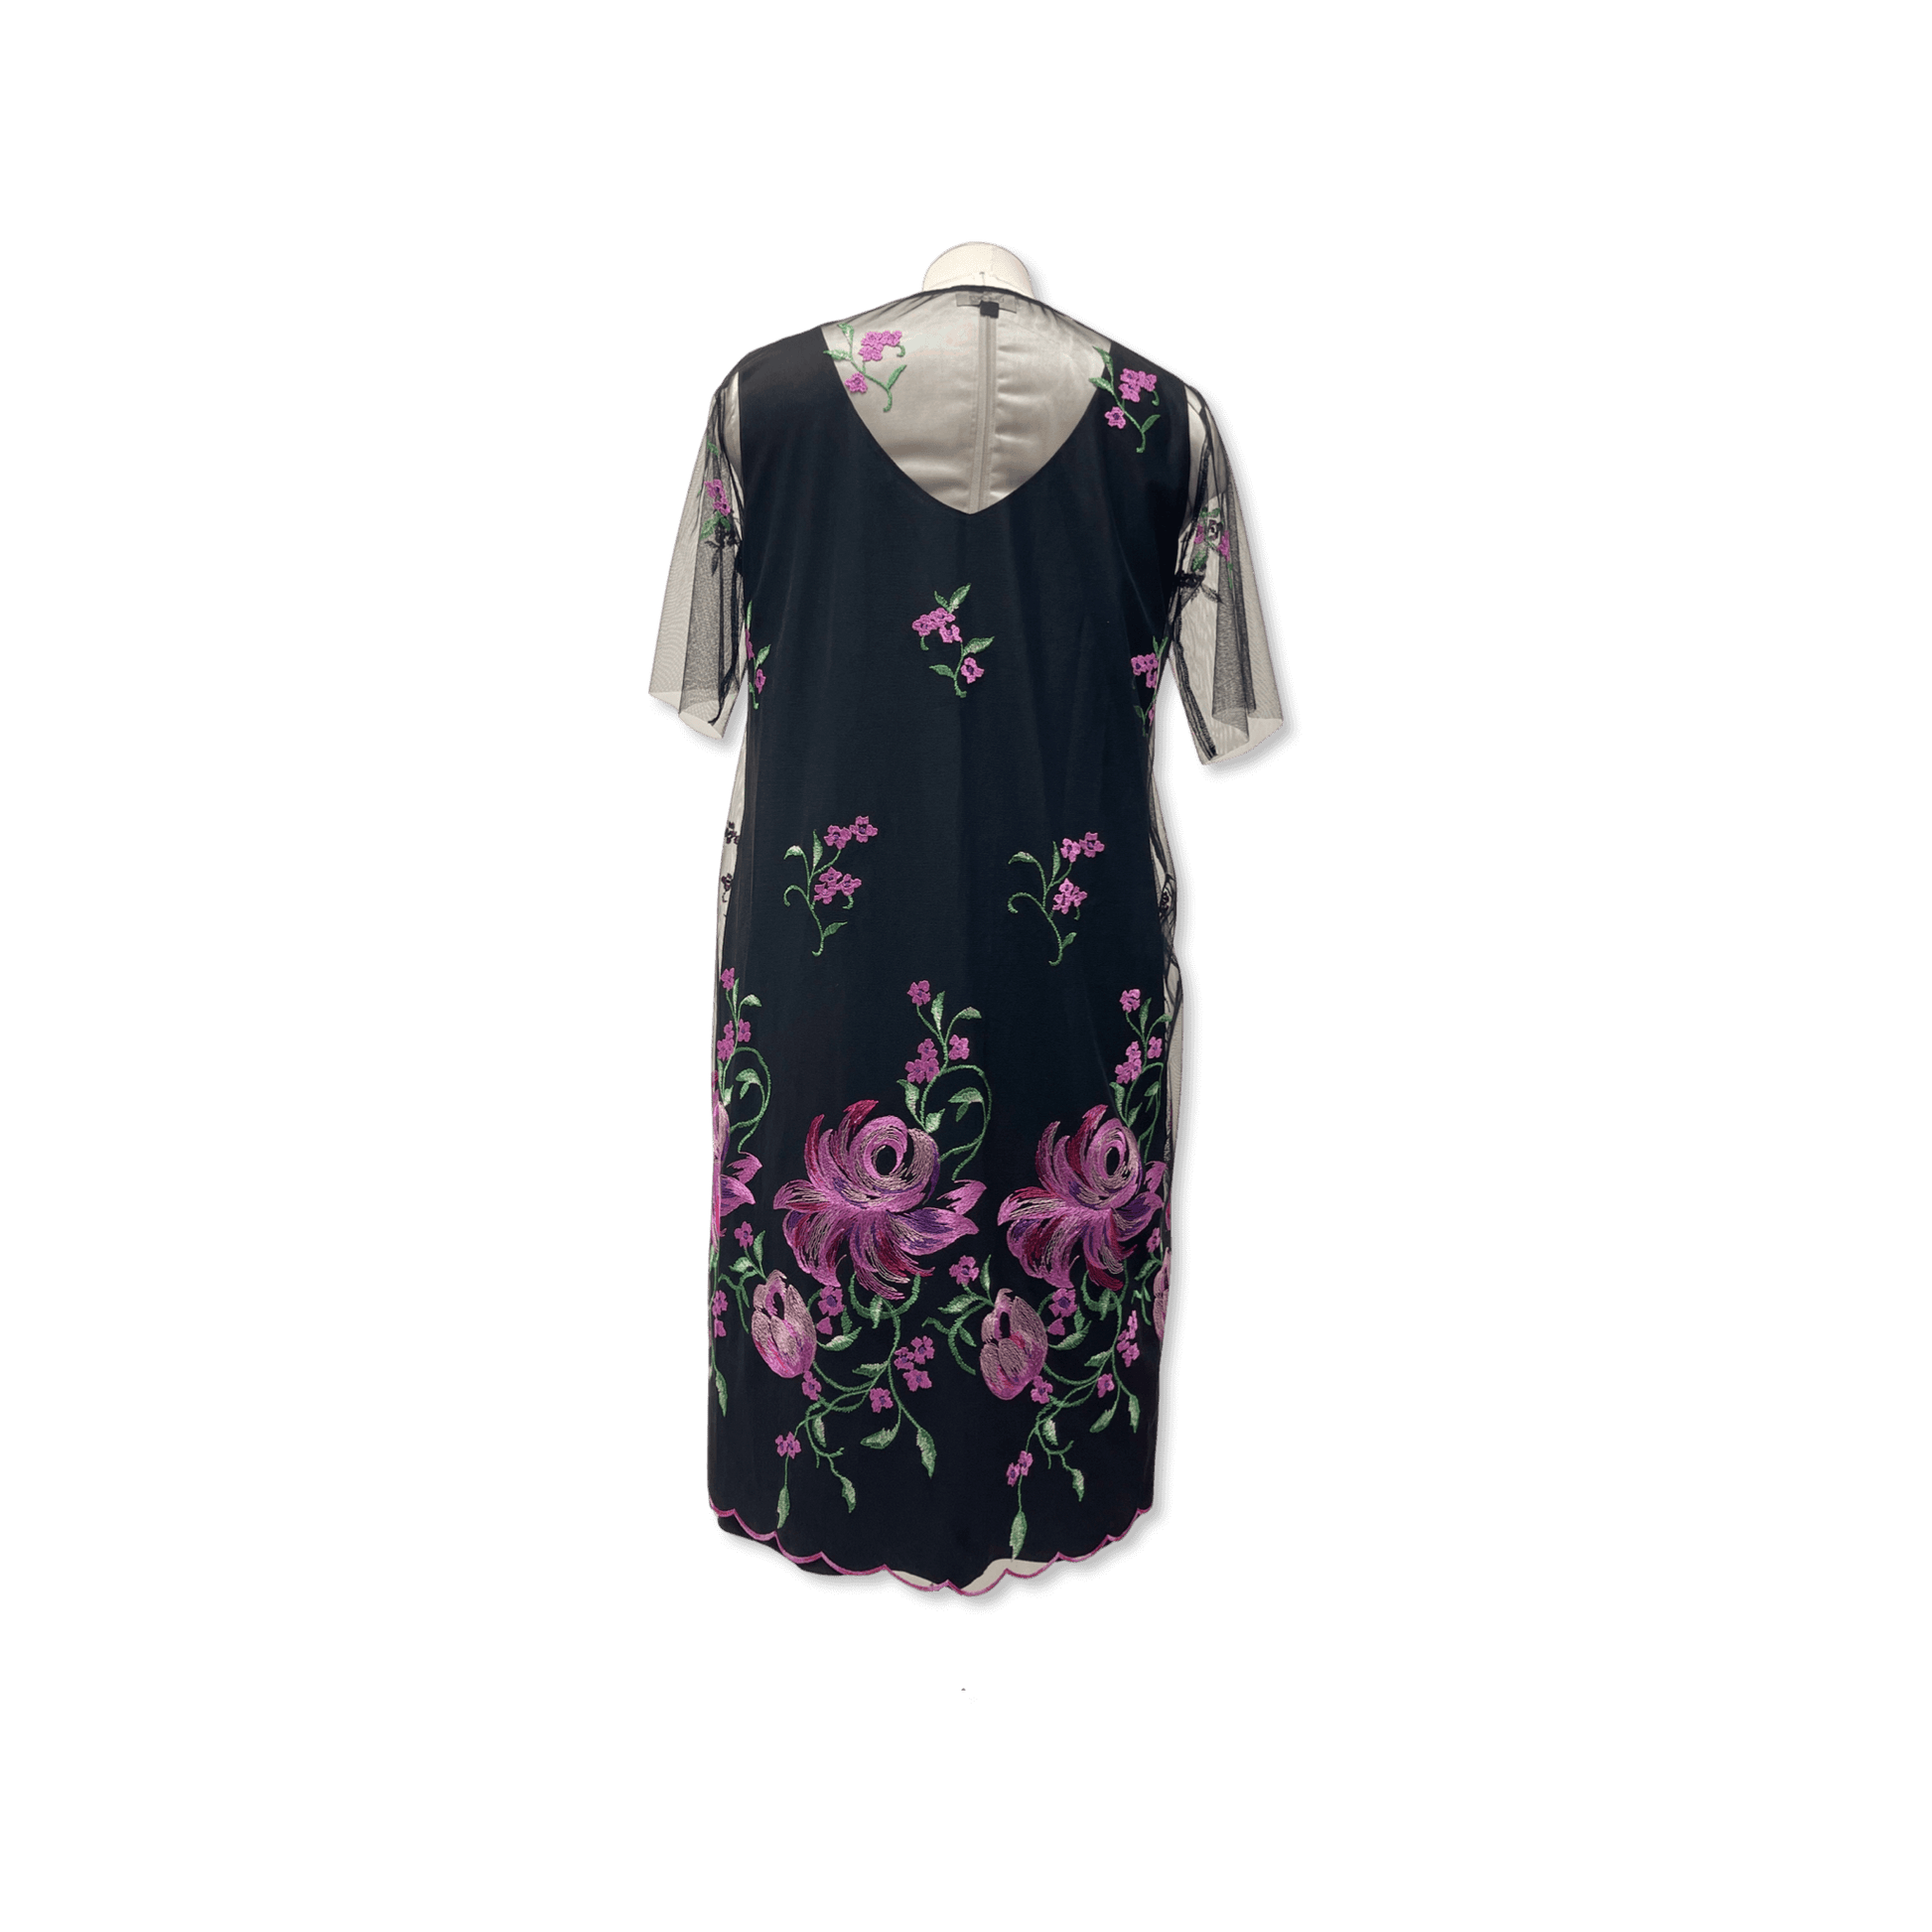 Bloom Clothing NZ,EMBROIDERED TULLE DRESS,$279.00,